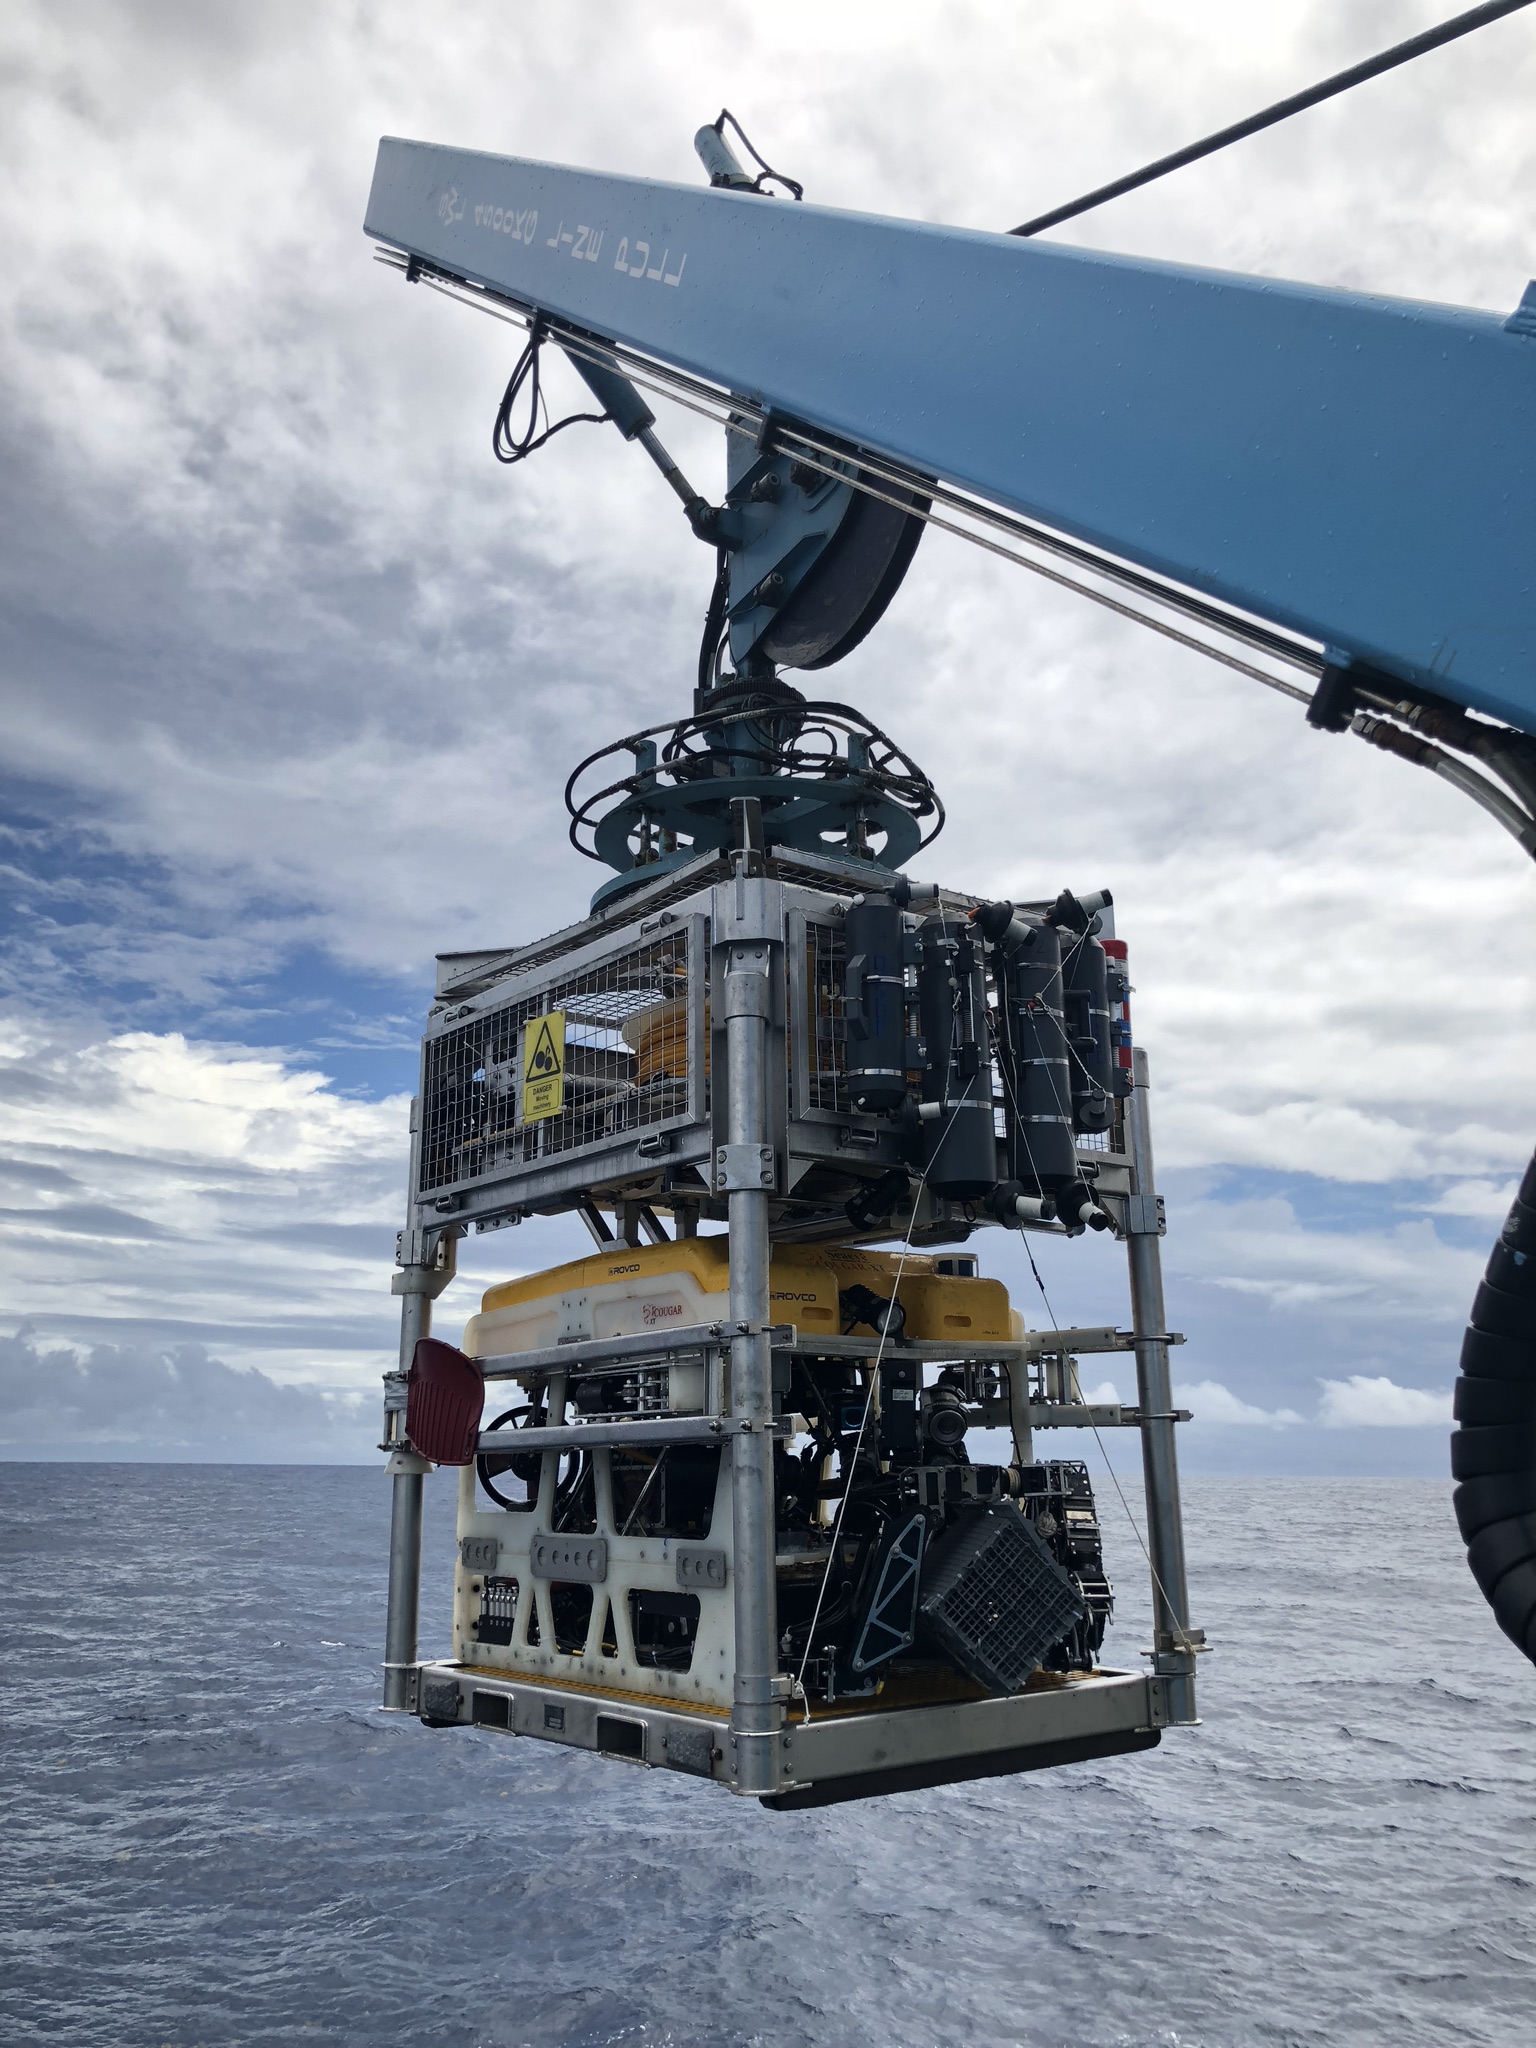 Rovco ROV Greenpeace Reef Project